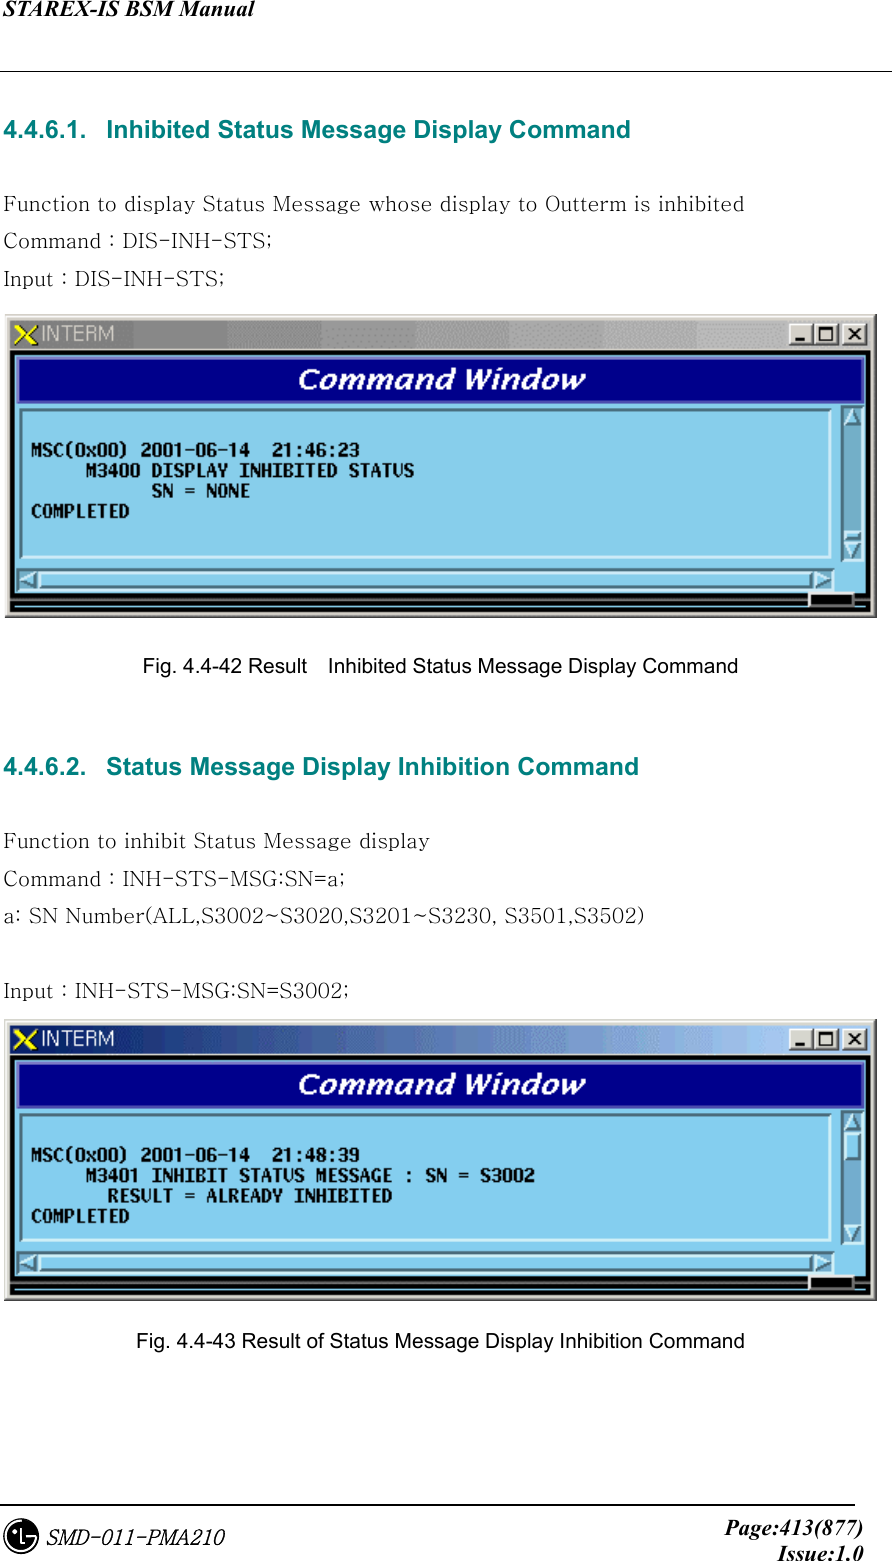 STAREX-IS BSM Manual     Page:413(877)Issue:1.0SMD-011-PMA210  4.4.6.1.   Inhibited Status Message Display Command  Function to display Status Message whose display to Outterm is inhibited Command : DIS-INH-STS; Input : DIS-INH-STS;  Fig. 4.4-42 Result    Inhibited Status Message Display Command  4.4.6.2.   Status Message Display Inhibition Command  Function to inhibit Status Message display Command : INH-STS-MSG:SN=a; a: SN Number(ALL,S3002~S3020,S3201~S3230, S3501,S3502)  Input : INH-STS-MSG:SN=S3002;  Fig. 4.4-43 Result of Status Message Display Inhibition Command   